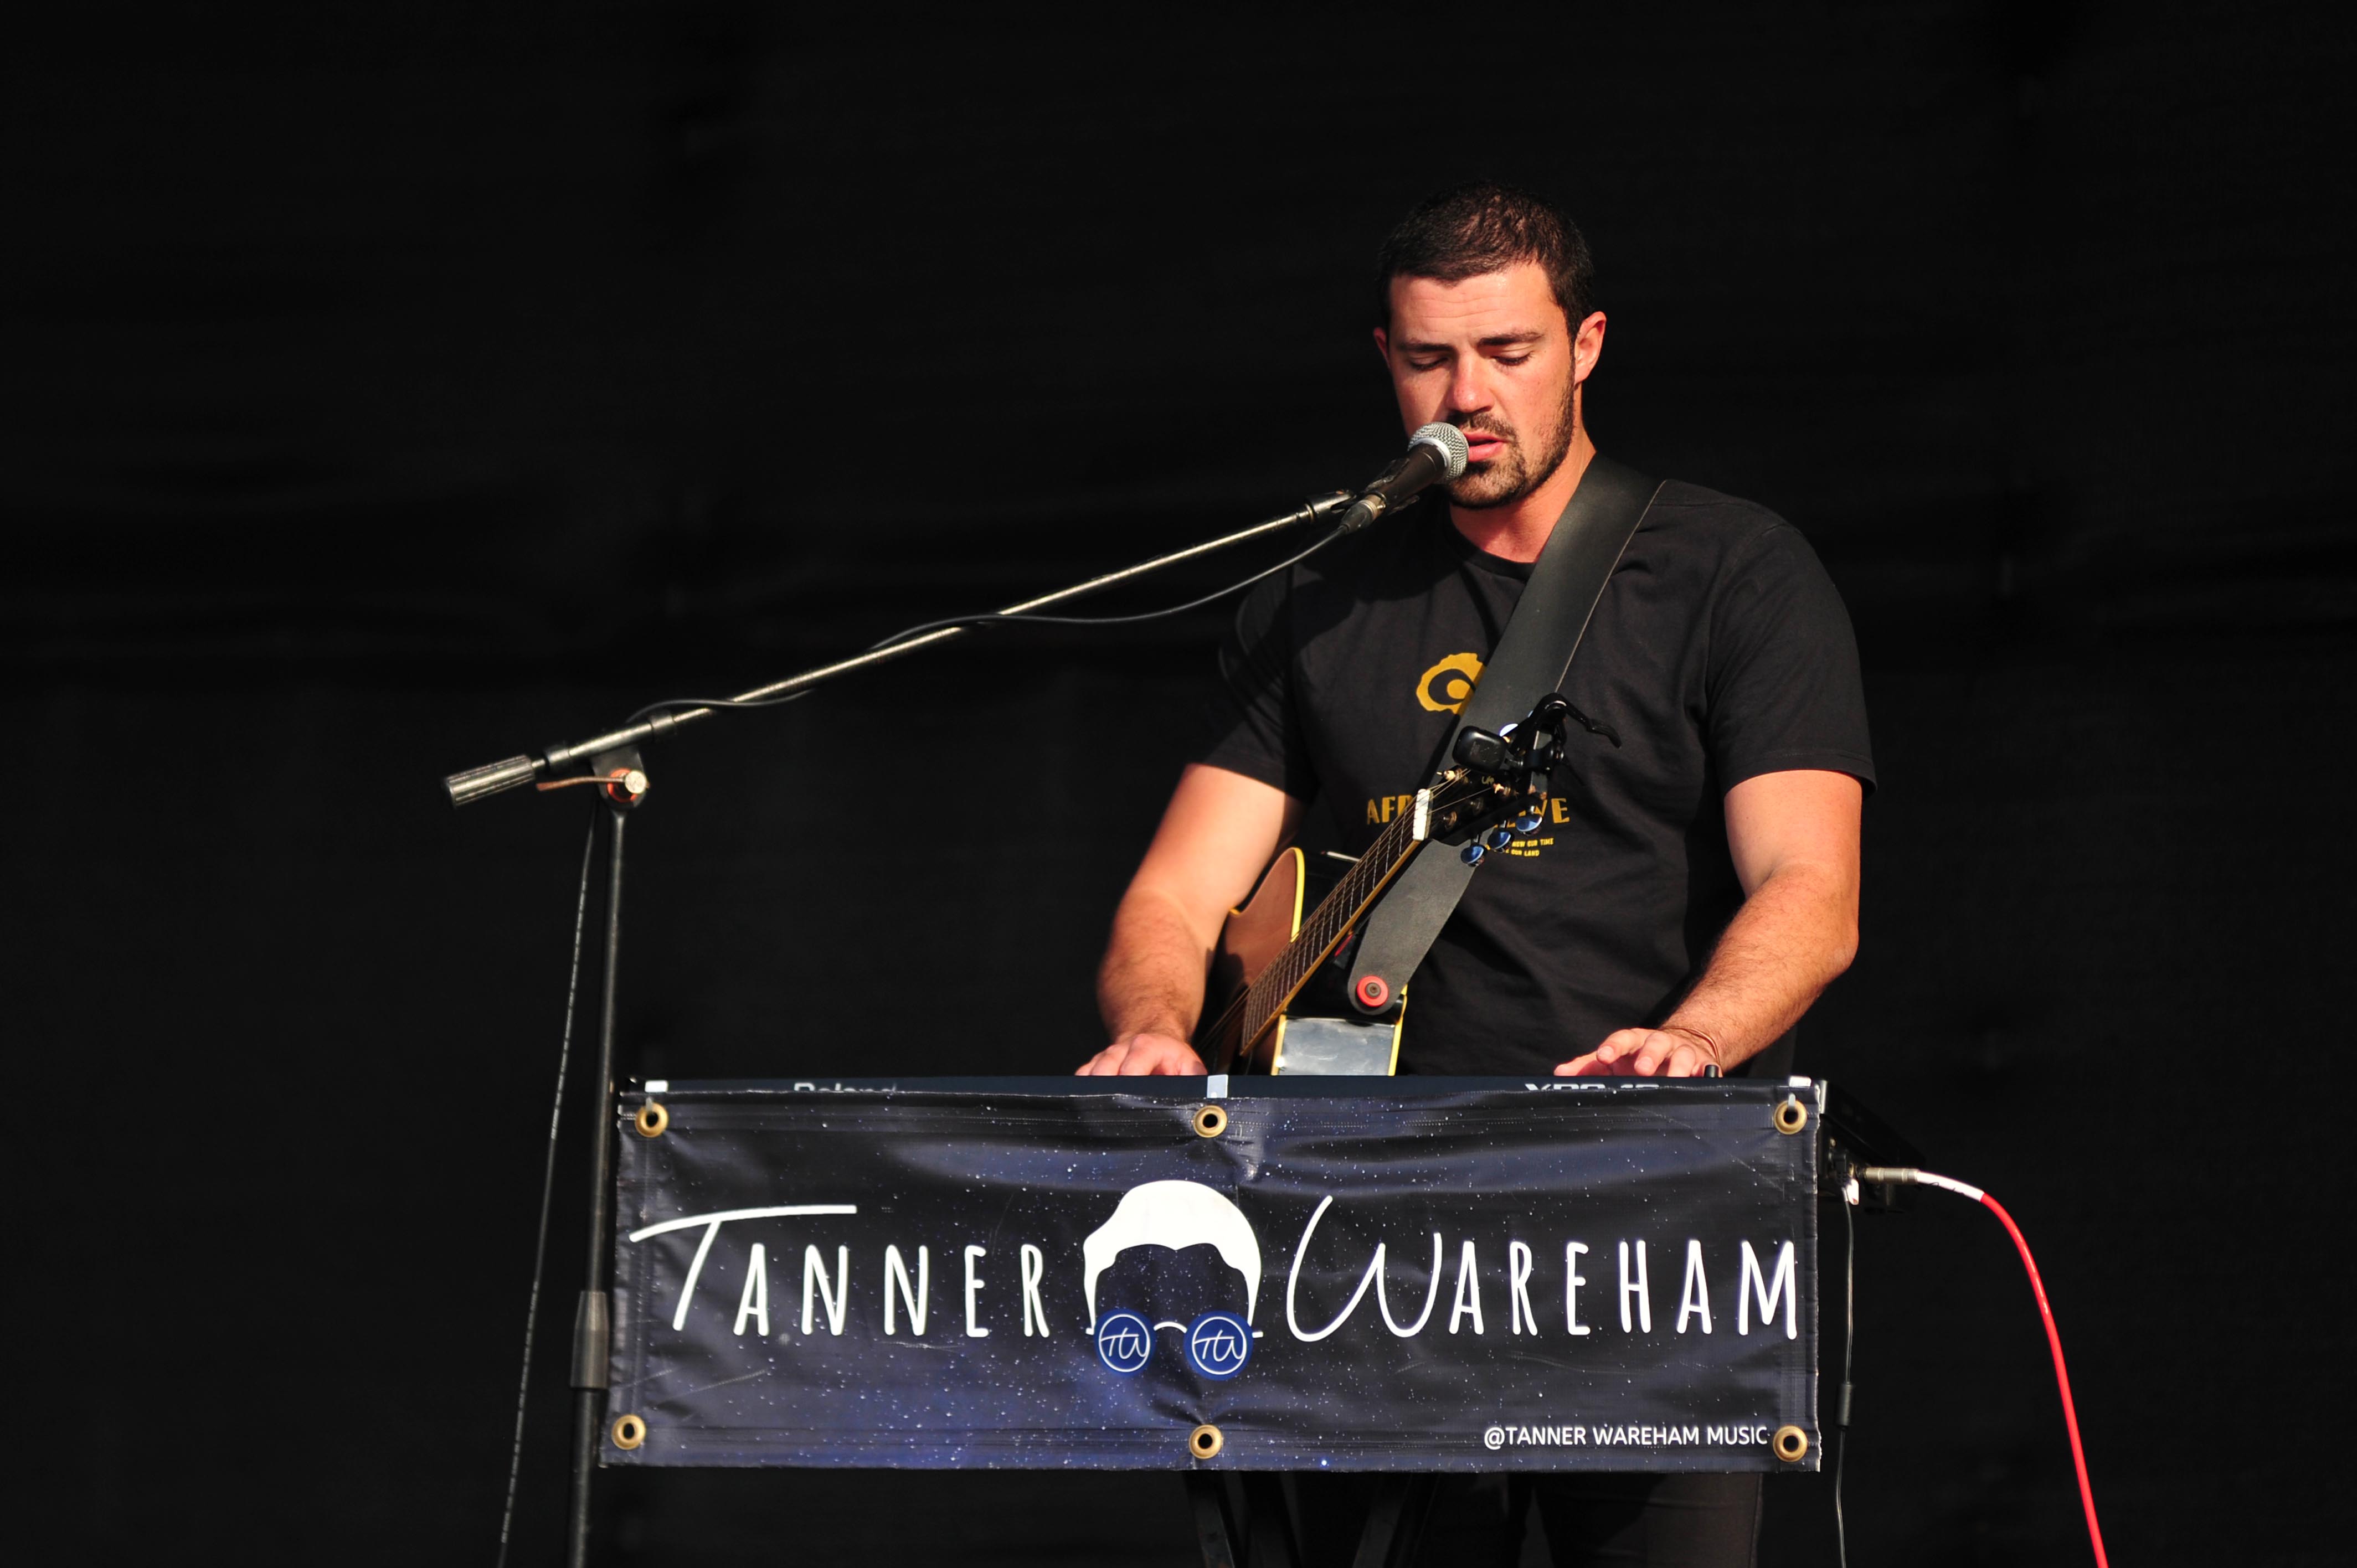 DURBAN, SOUTH AFRICA - AUGUST 05: Tanner Wareham perform on August 5, 2021 in Durban, South Africa. It is reported that the Sharks recently launched #handsofhope campaign that seeks to rebuild the province following the civil unrest and also partnered with KZN's number 1 hit music station, East Coast Radio, to the rebuild team for phase 2 of this upliftment project. (Photo by Gallo Images/Darren Stewart)